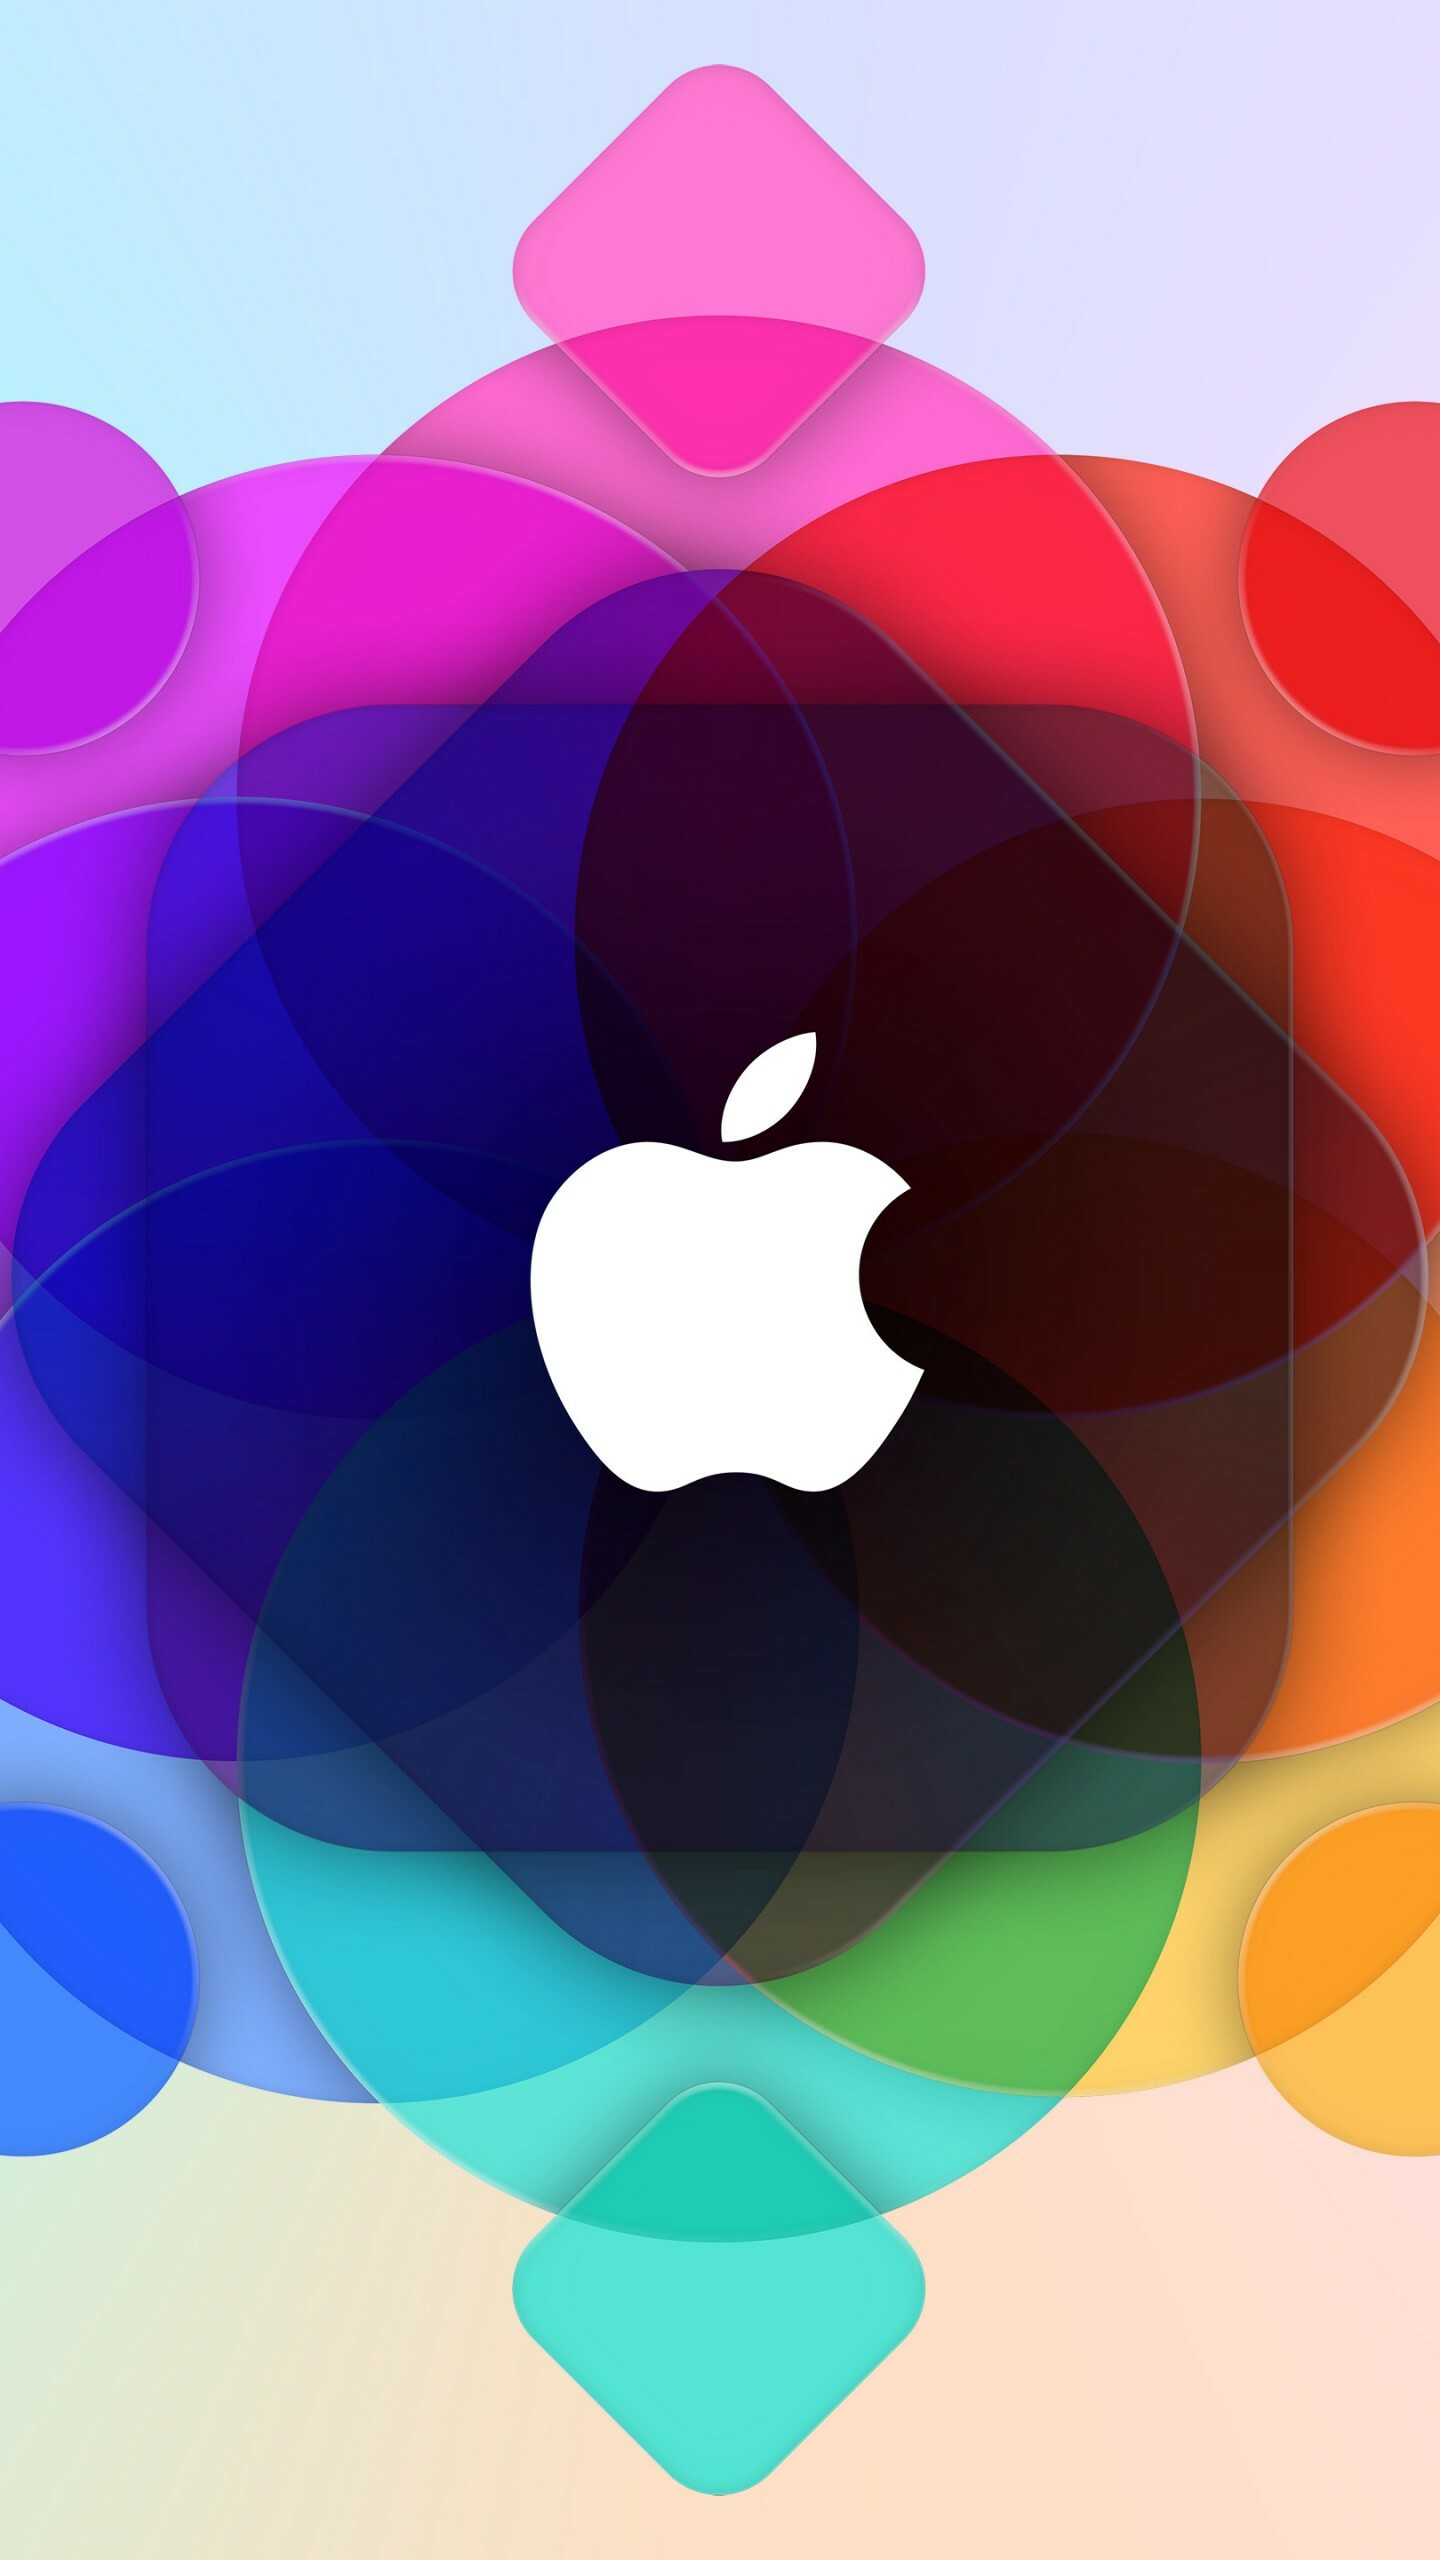 Apple Logo: Company, known for its iconic products, Steve Jobs. 1440x2560 HD Background.